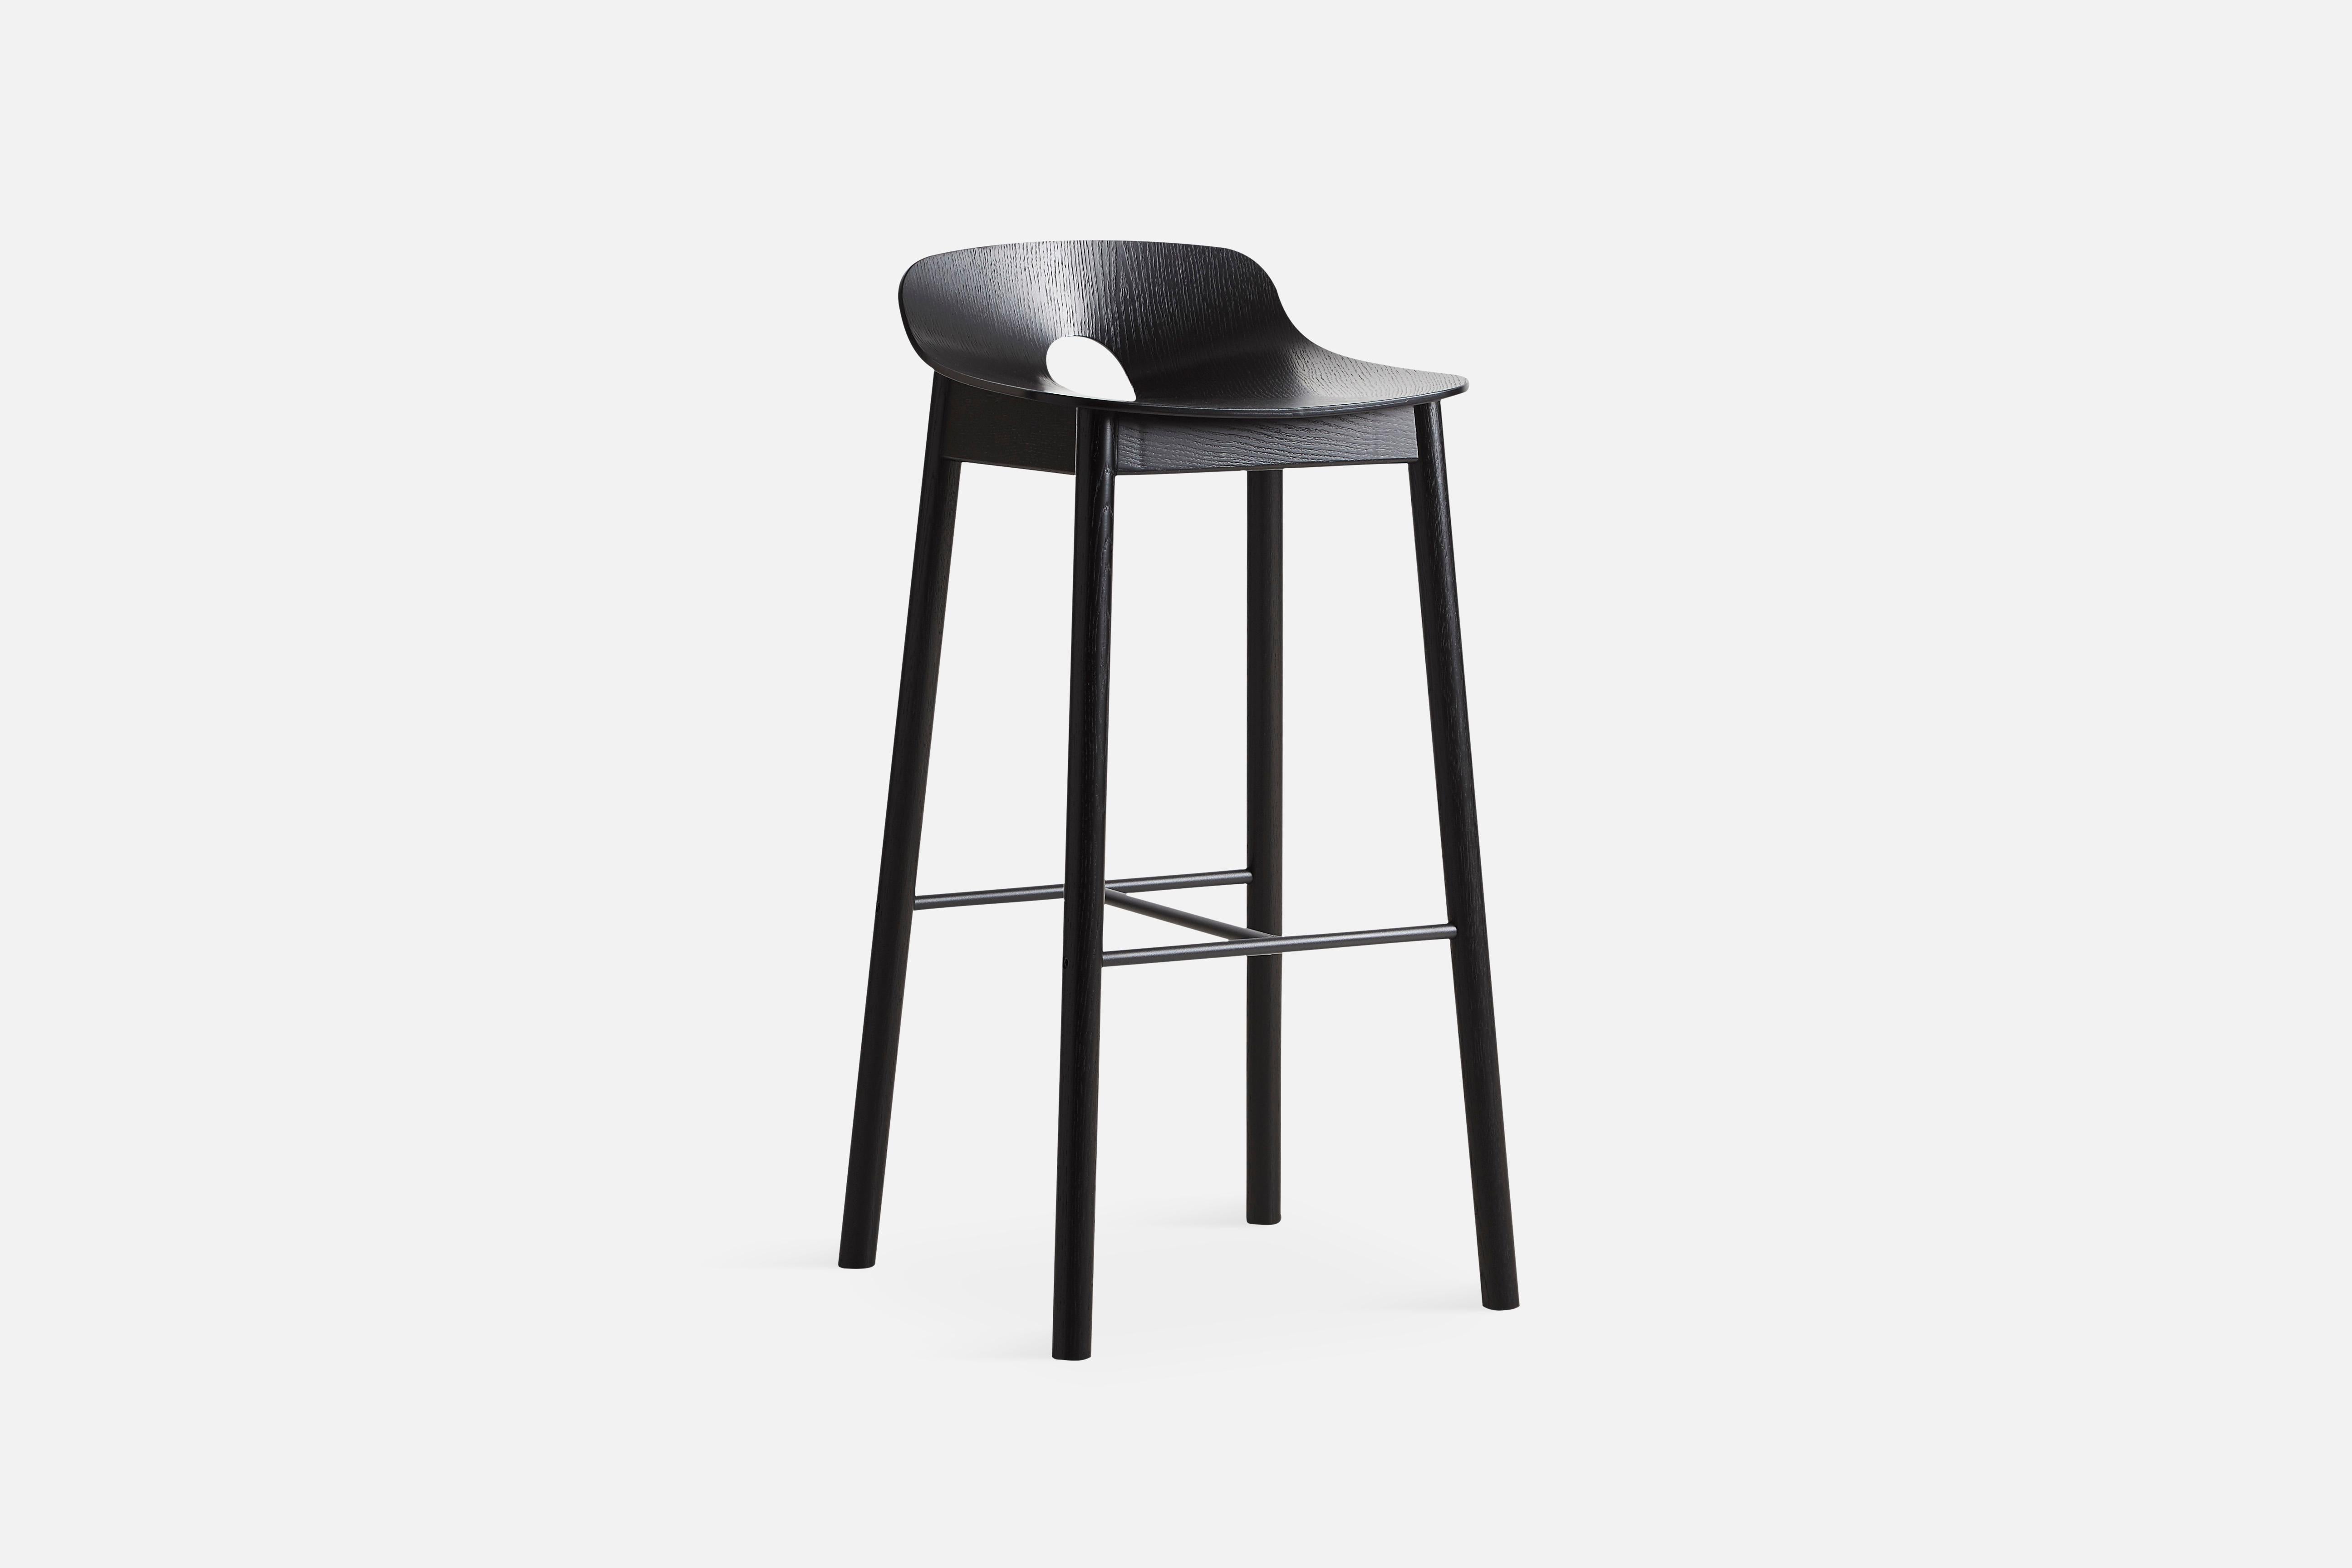 Mono bar stool by Kasper Nyman. 
Materials: Plywood with Ash Veneer.
Dimensions: D 44.7 x W 43.7 x H 87.6 cm.

The founders, Mia and Torben Koed, decided to put their 30 years of experience into a new project. It was time for a change and a new